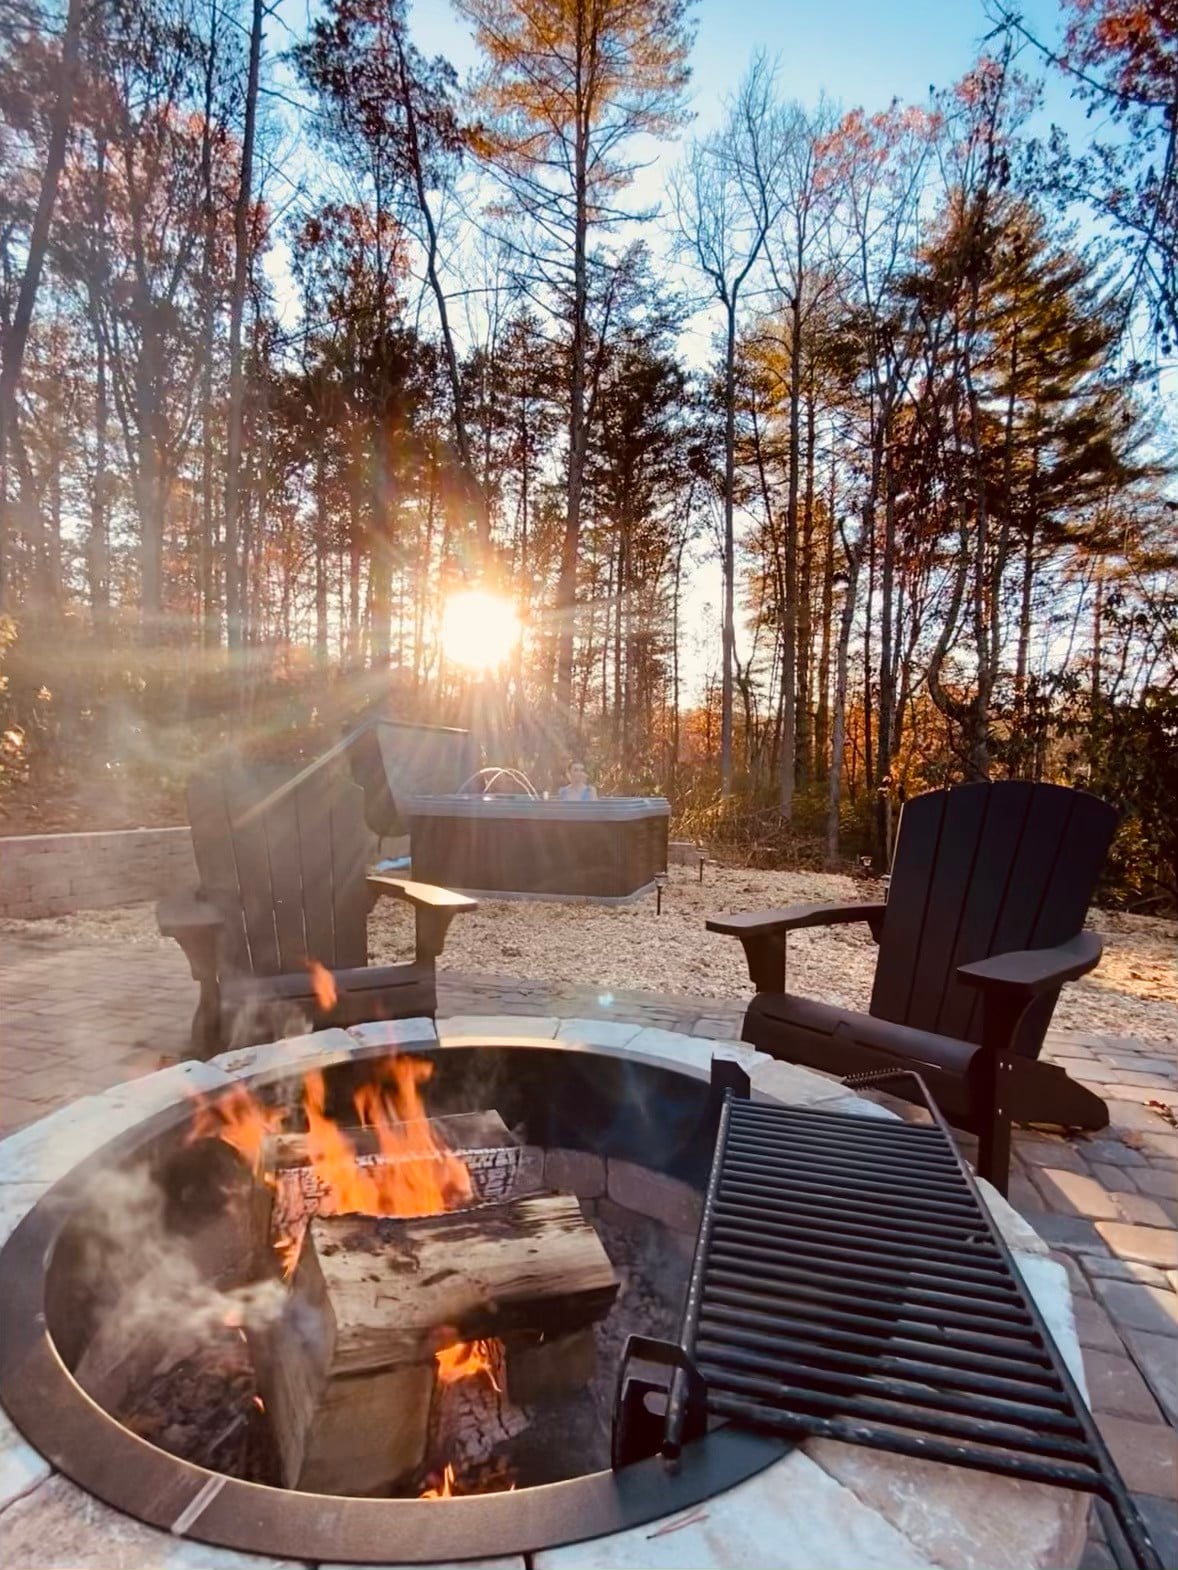 The Black Birch-Hot tub, Firepit, 1 mile to winery